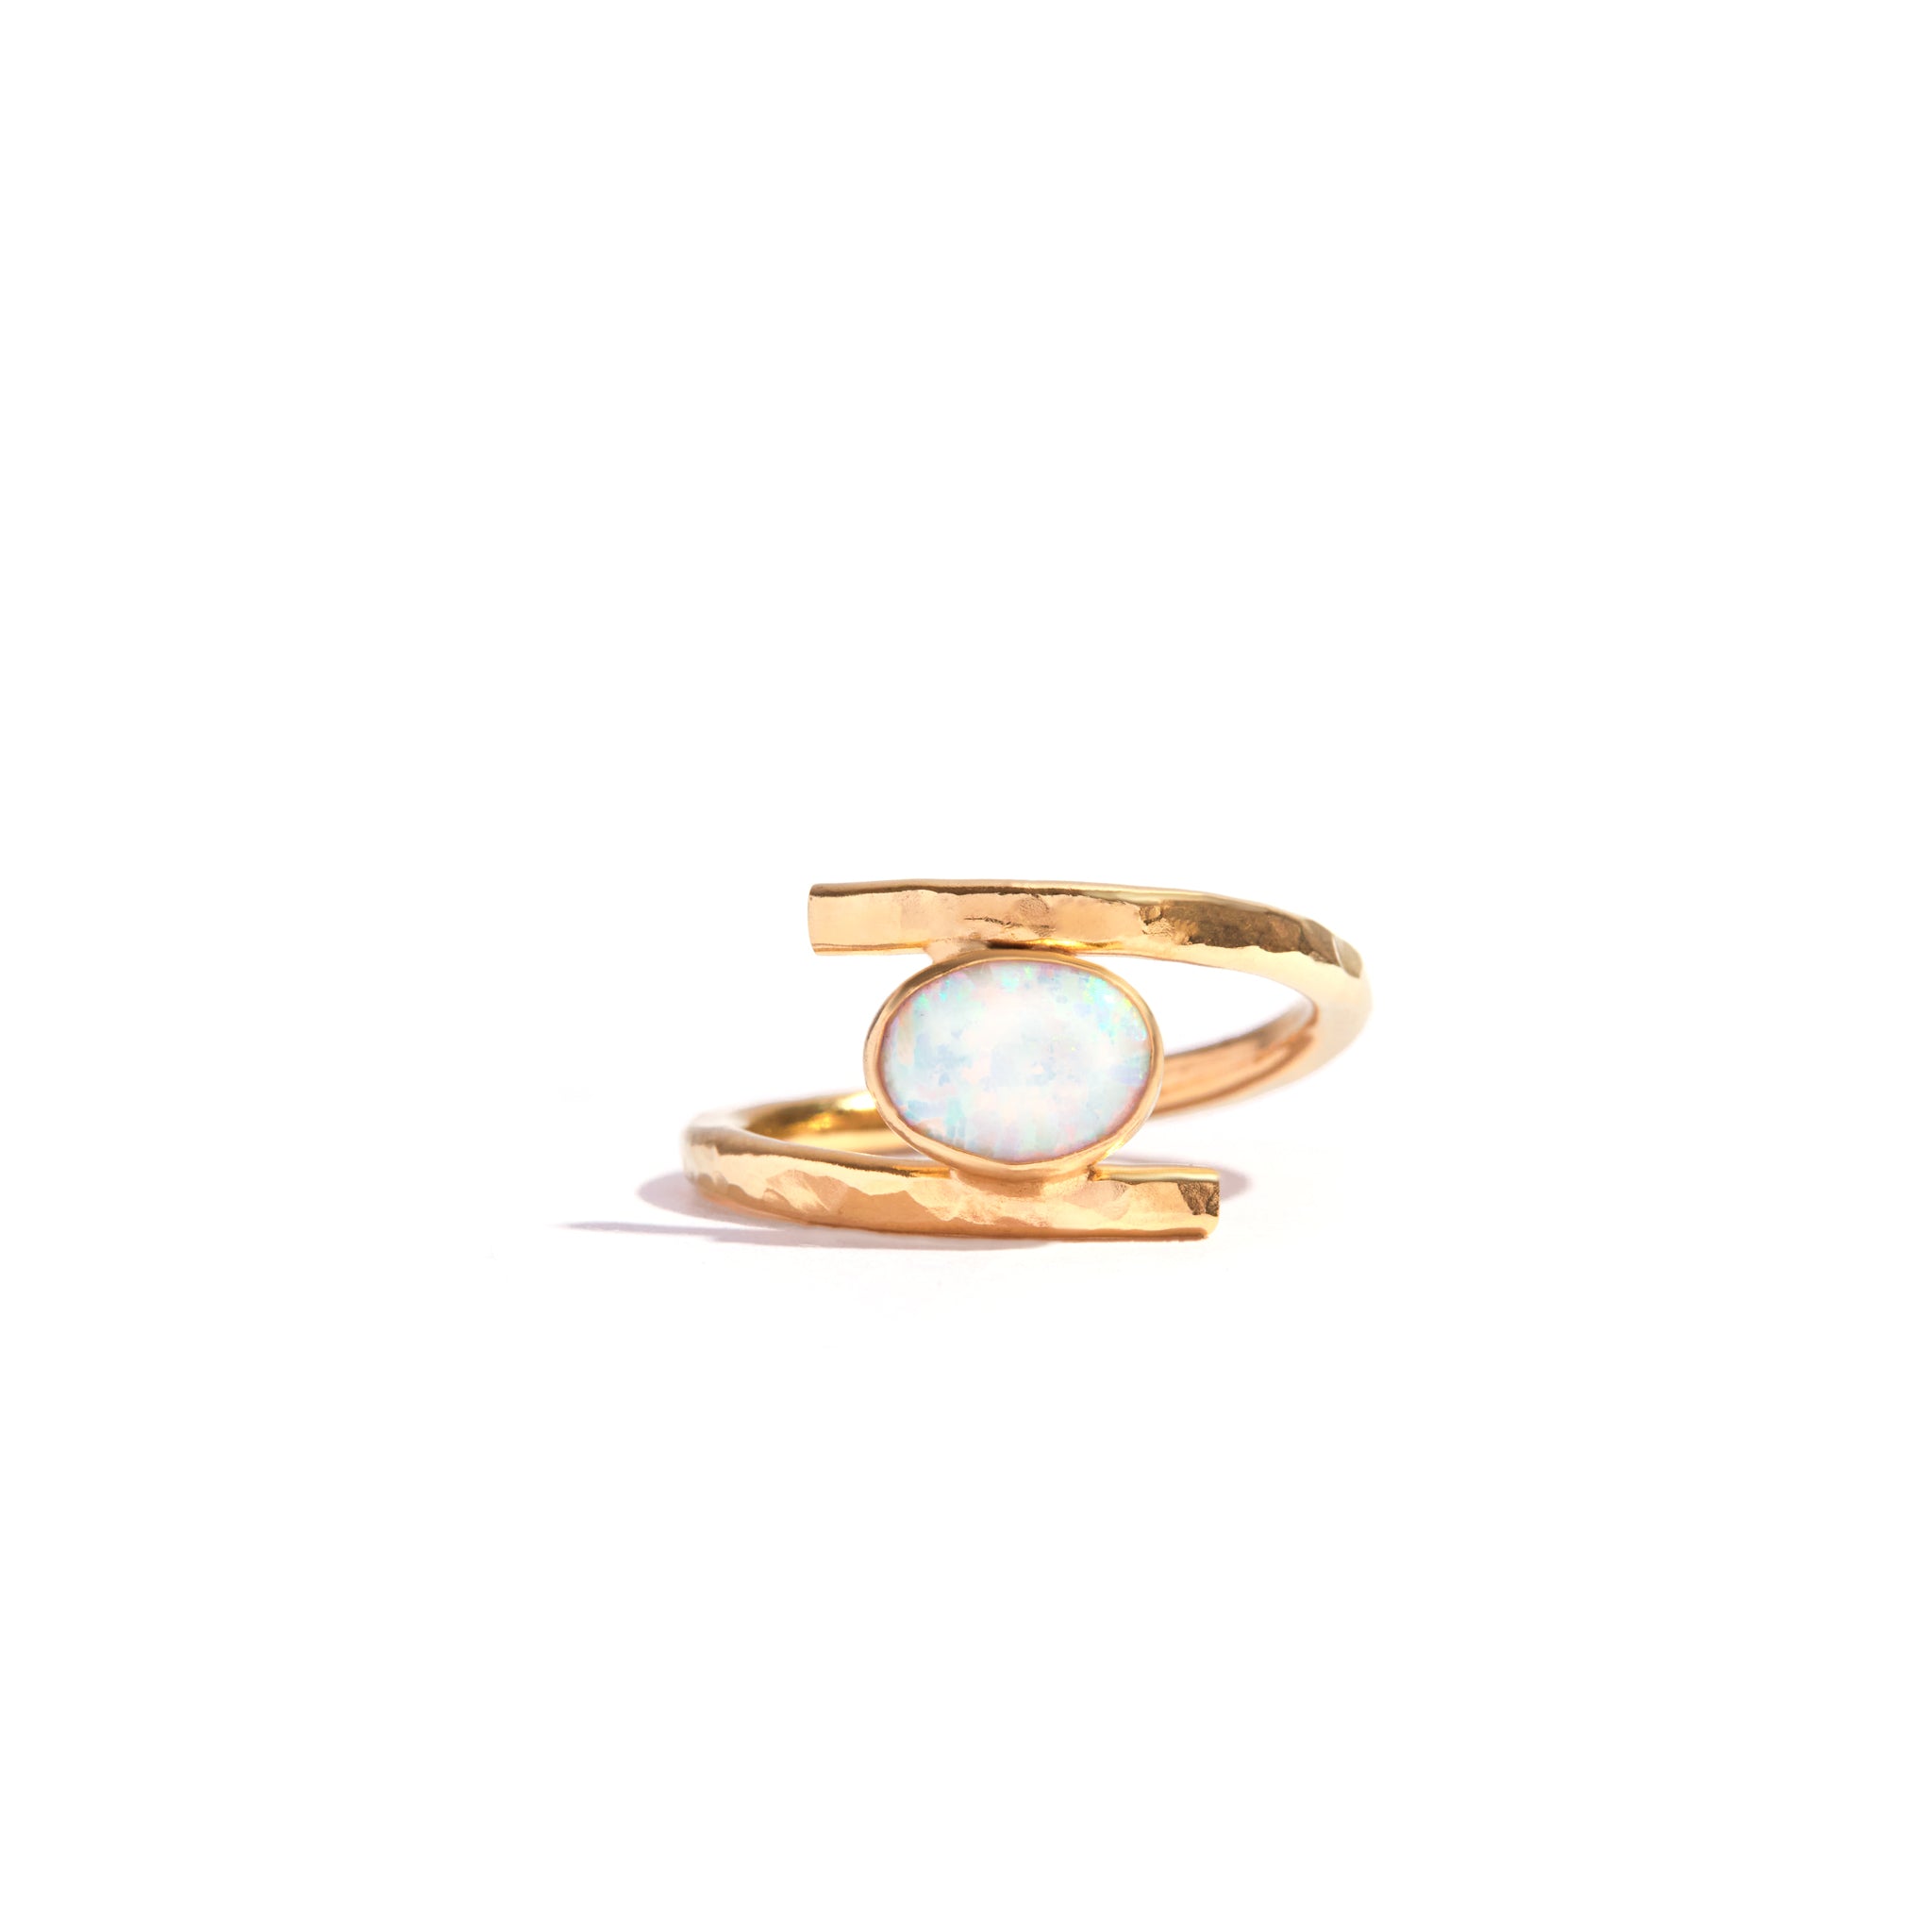 Stunning white opal stone ring set in elegant 14ct gold filled design, combining opal's elegance with gold's sophistication. Add charm to any outfit with this luxurious and durable piece